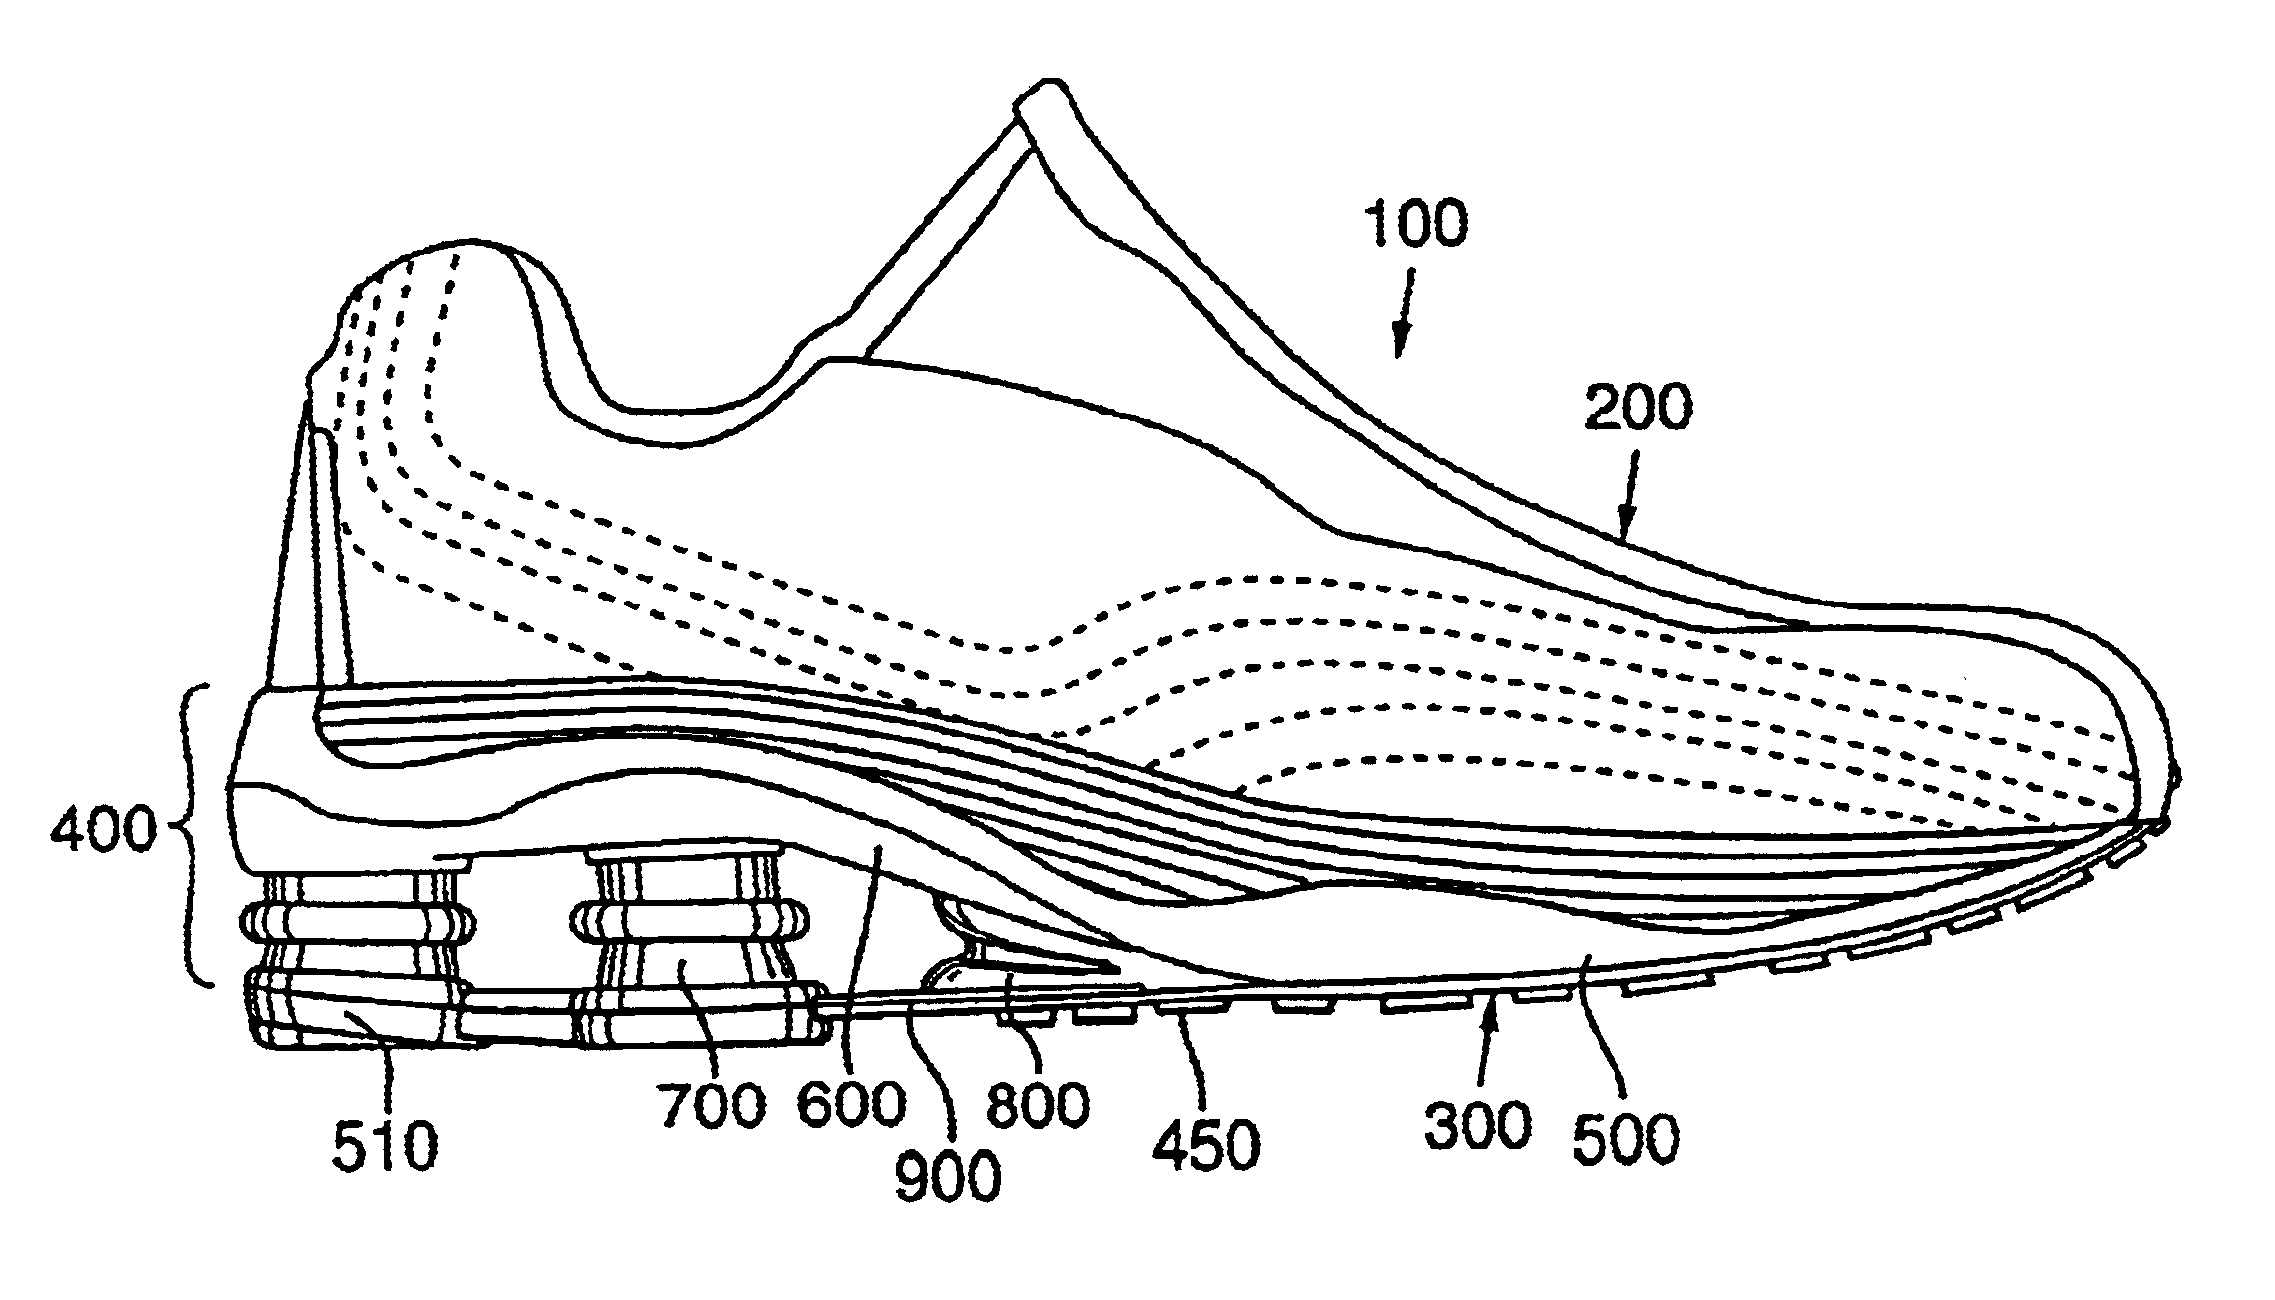 Footwear midsole with compressible element in lateral heel area